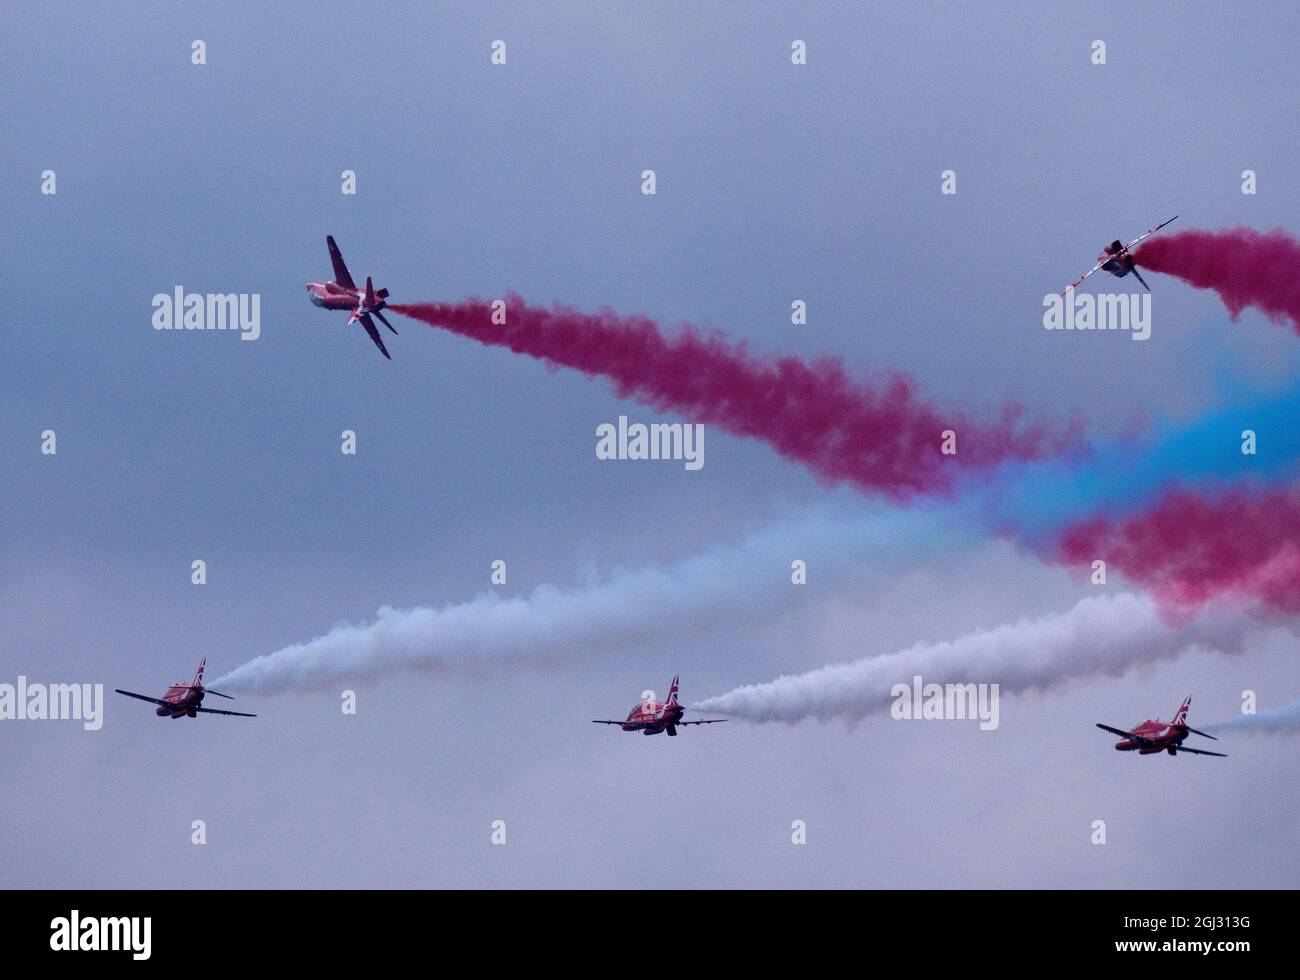 Two of the Red Arrows display team flying away from the main display area to reform, leaving smoke trails. Stock Photo